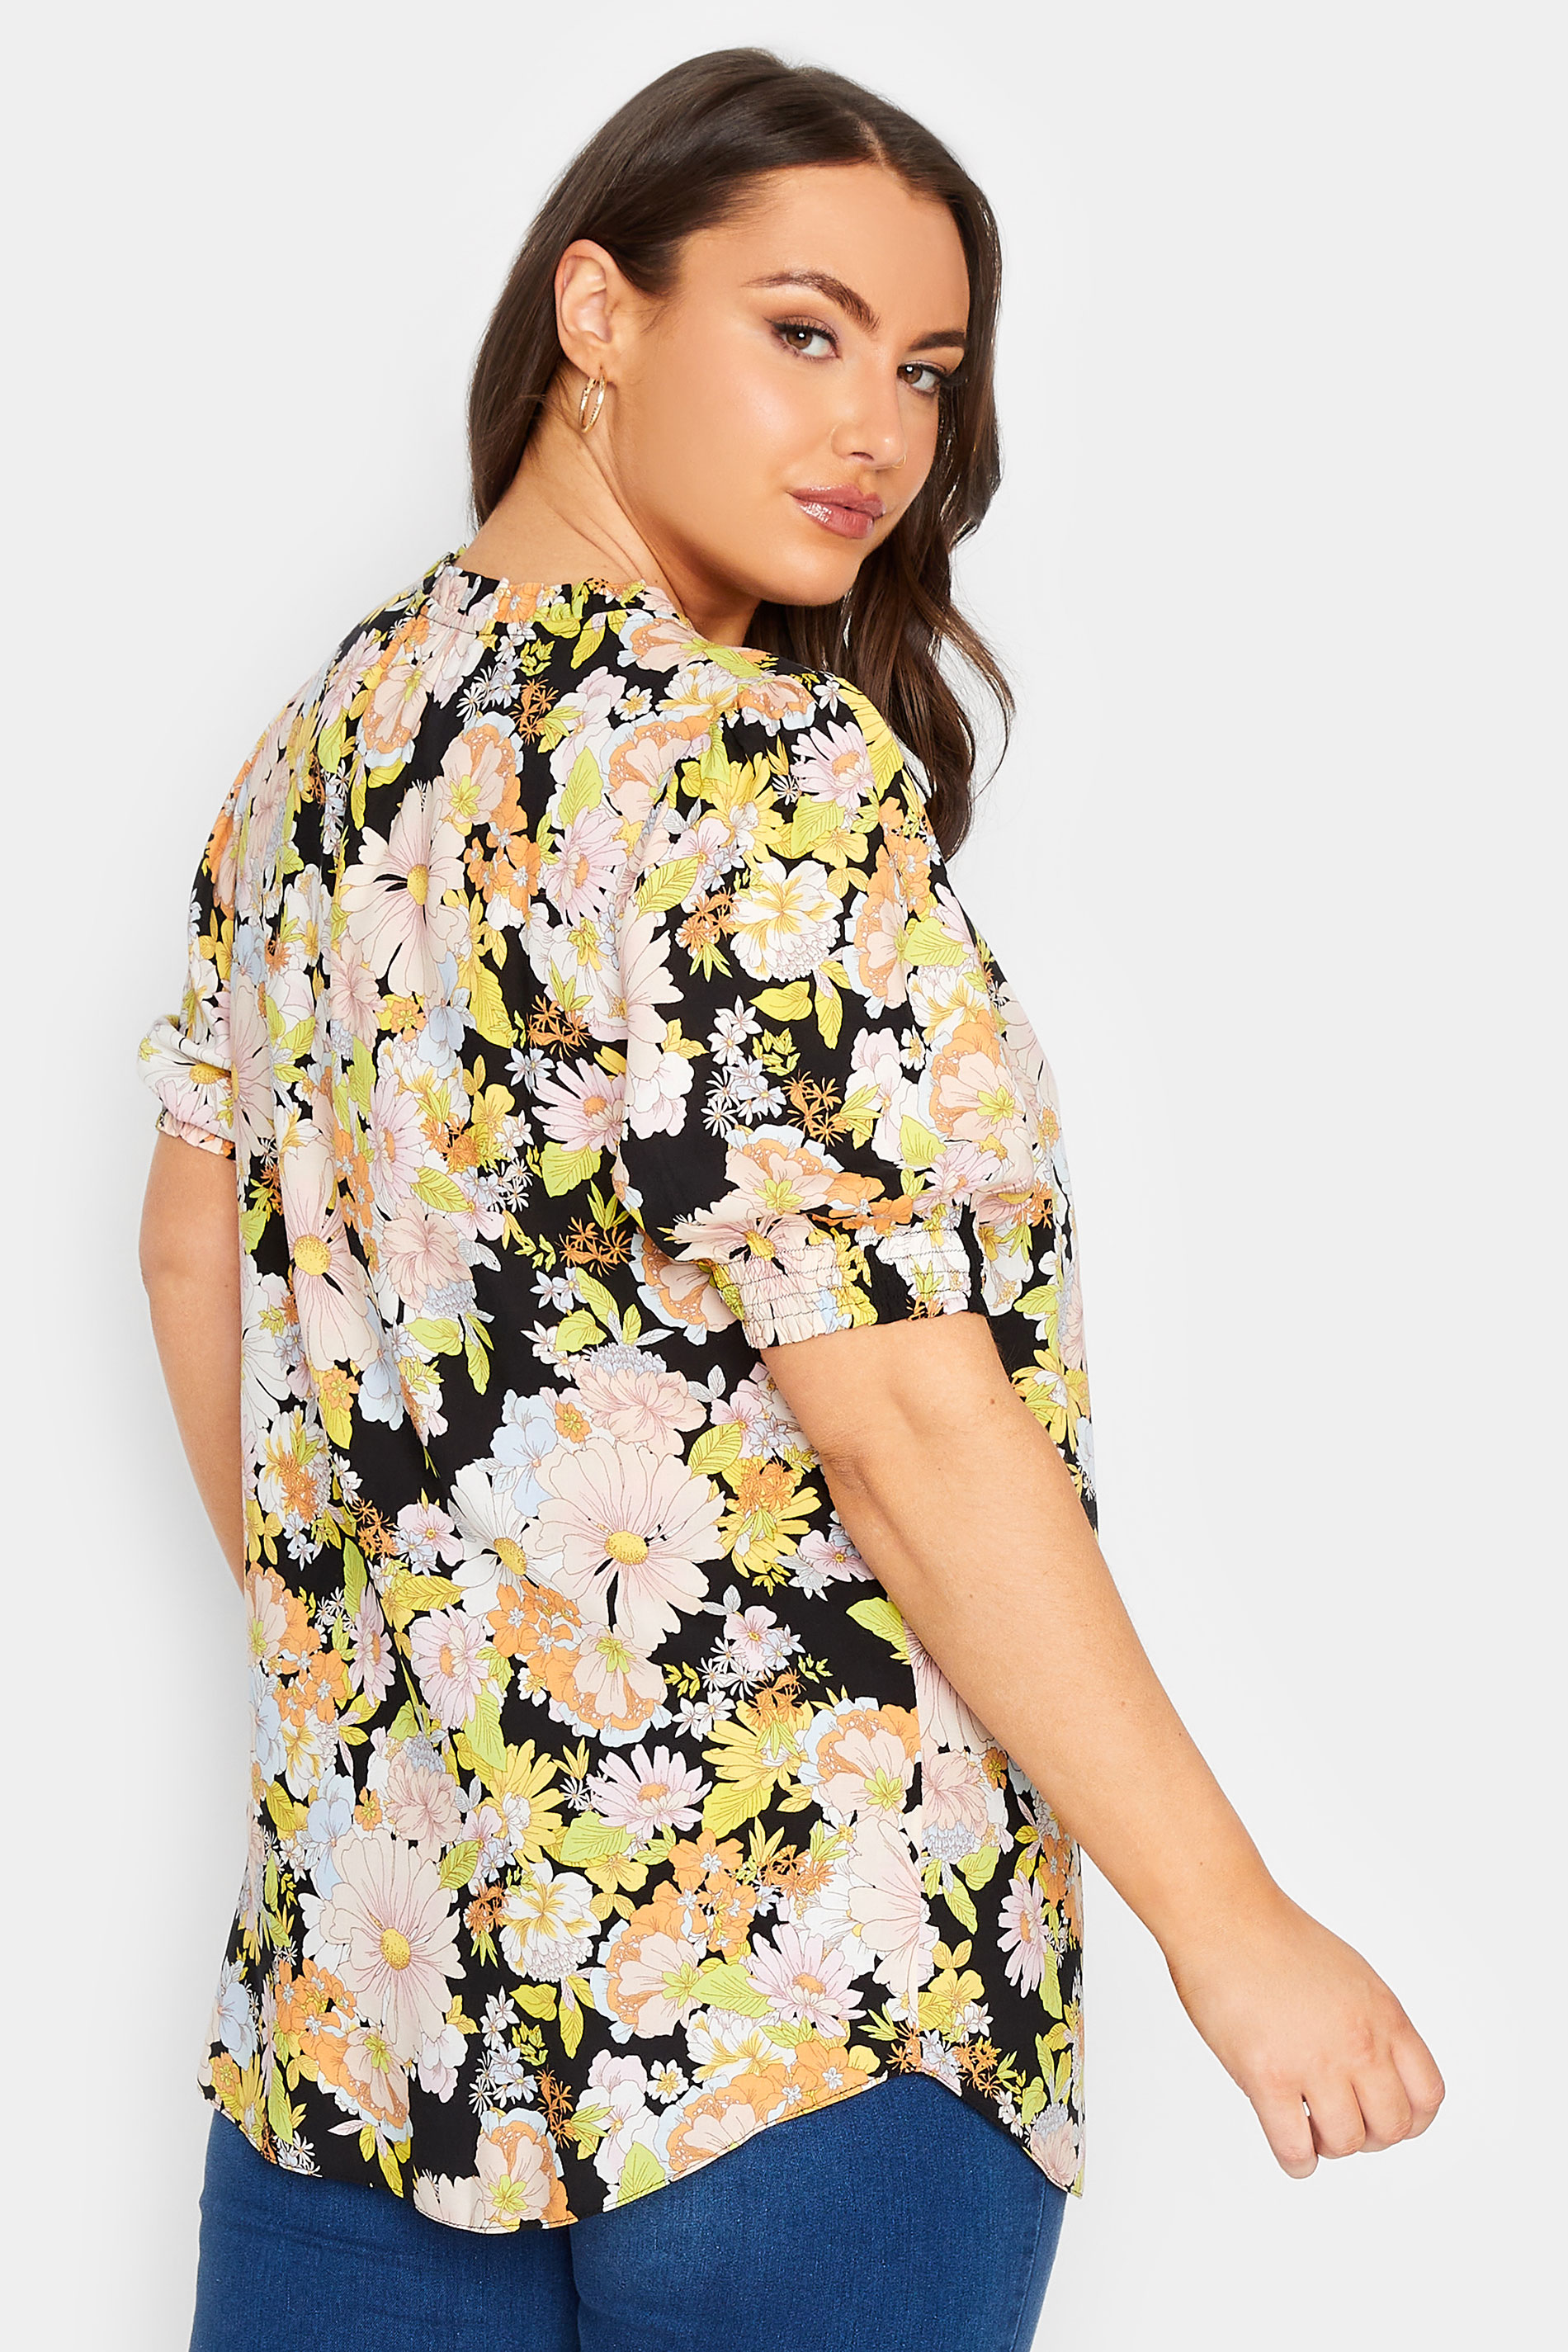 YOURS Plus Size Black & Yellow Floral Print Tie Neck Blouse | Yours Clothing 3